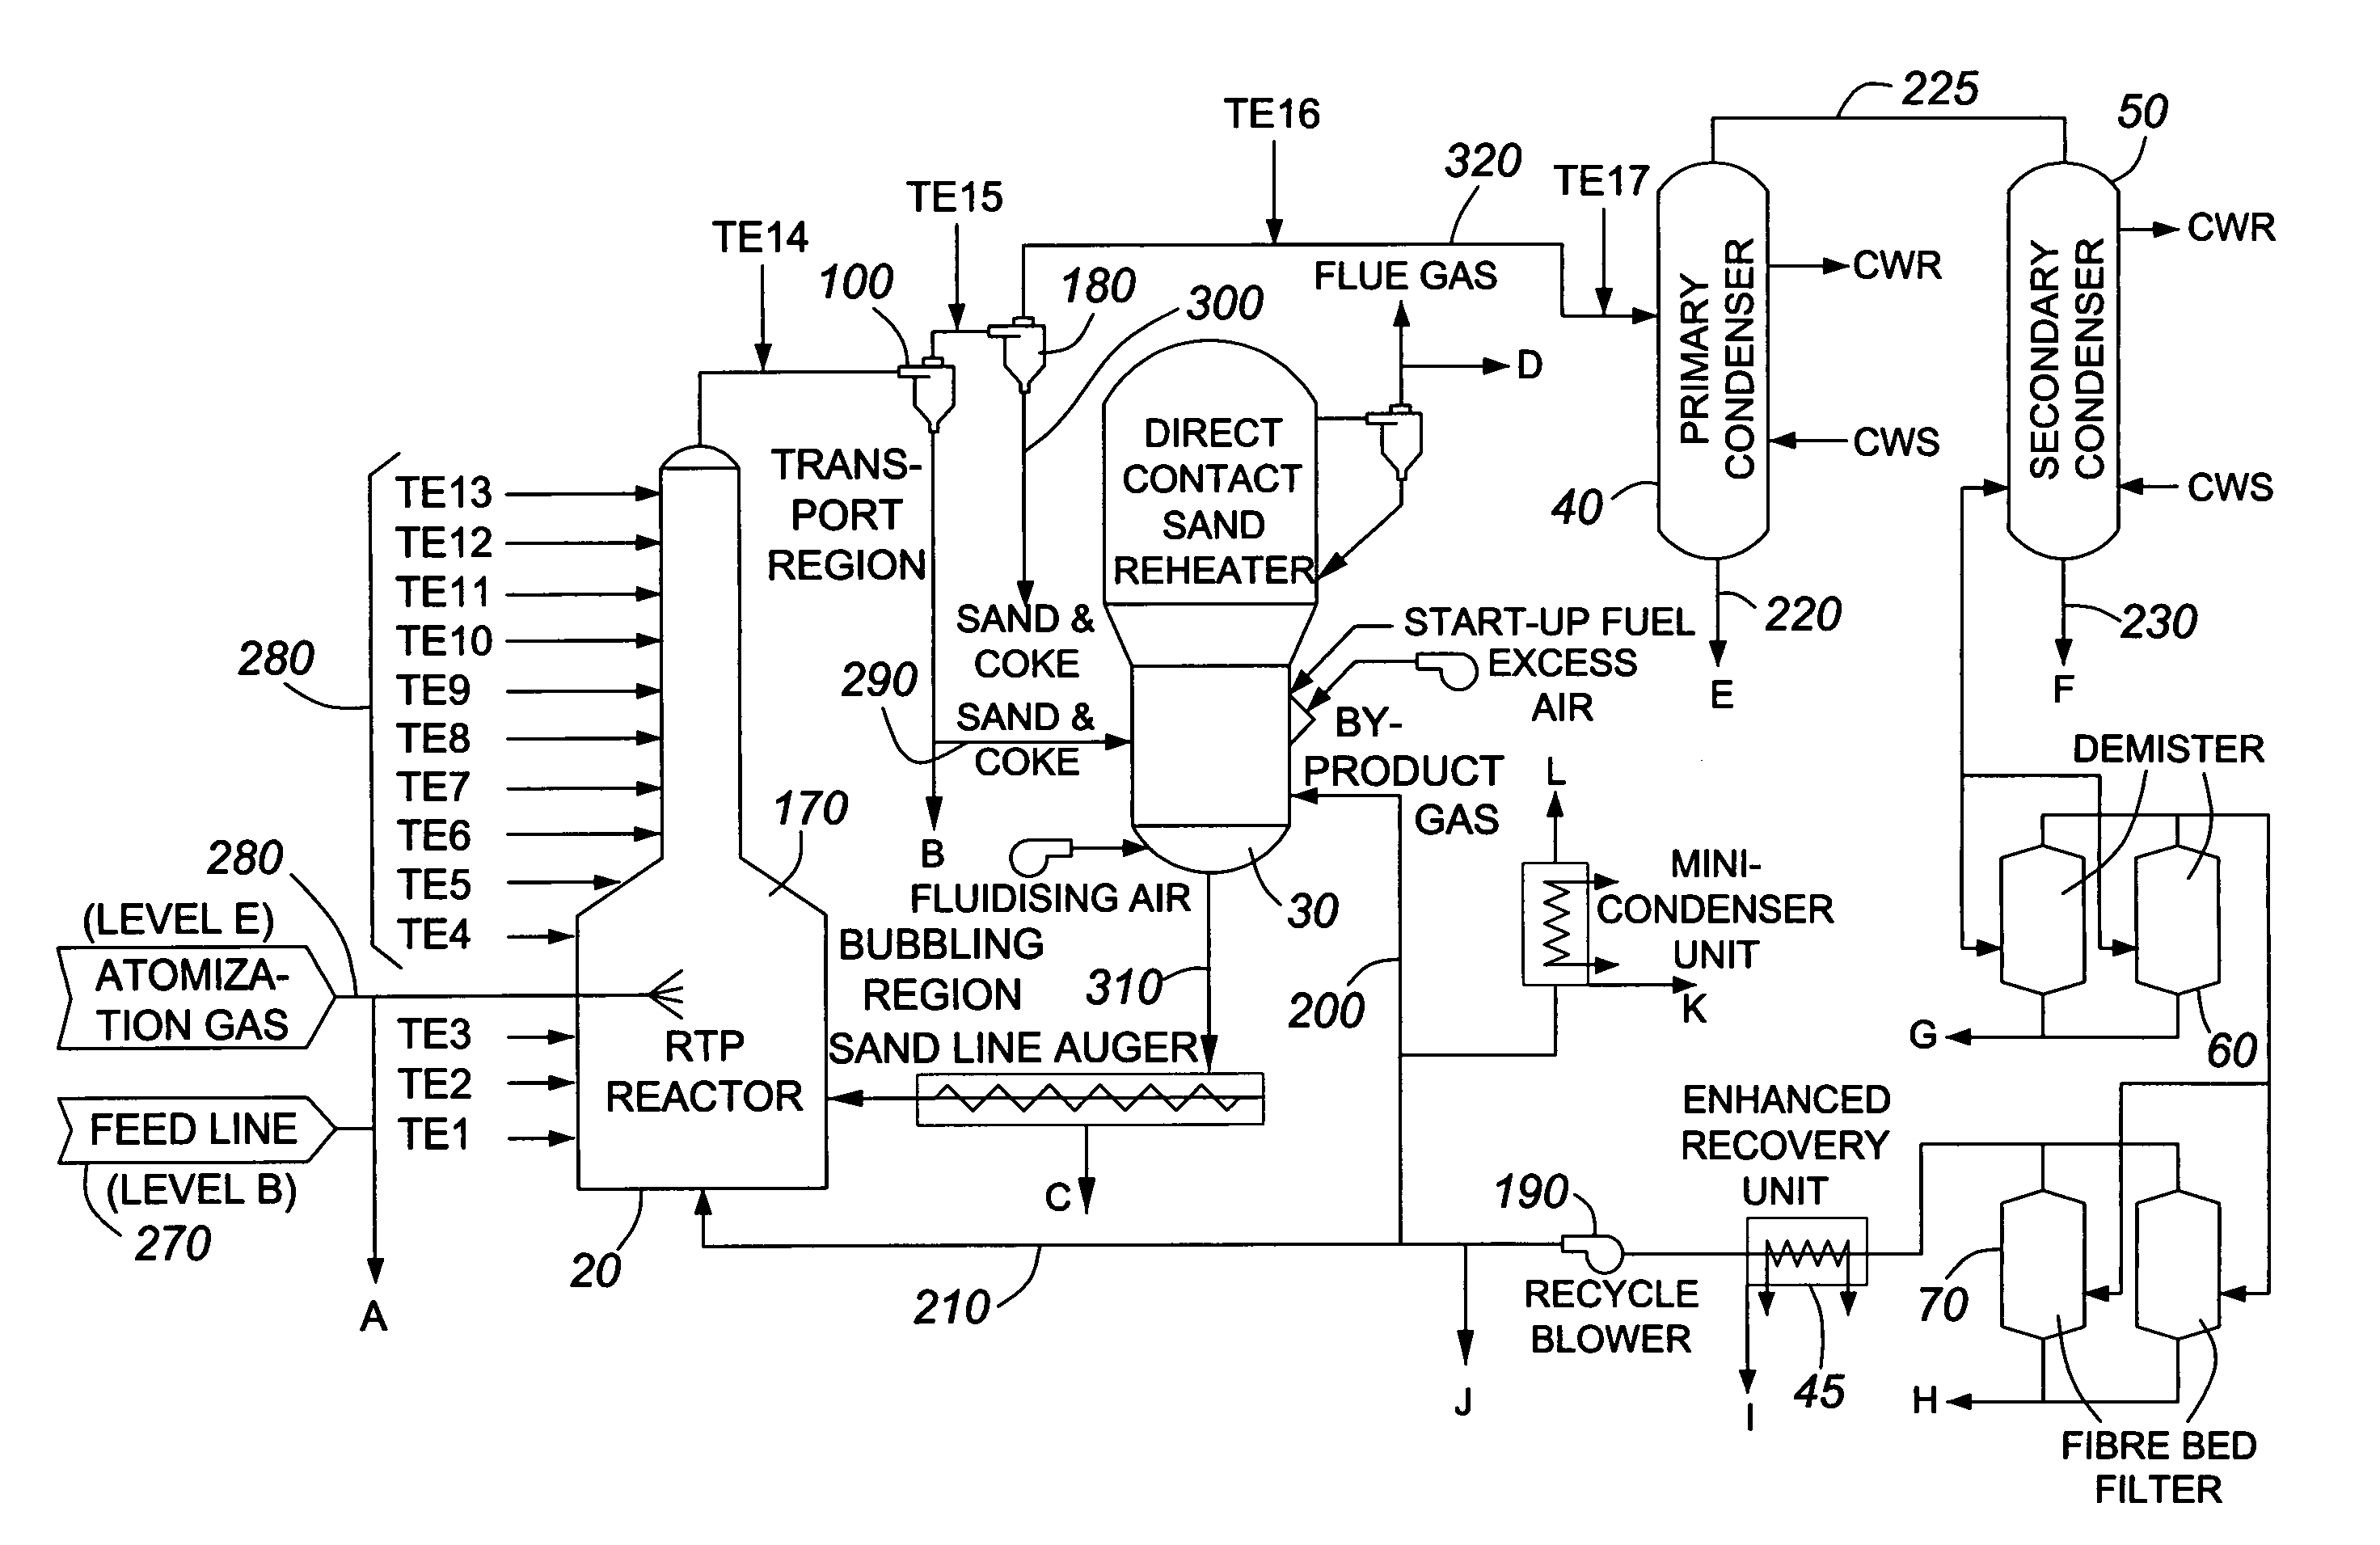 Modified thermal processing of heavy hydrocarbon feedstocks